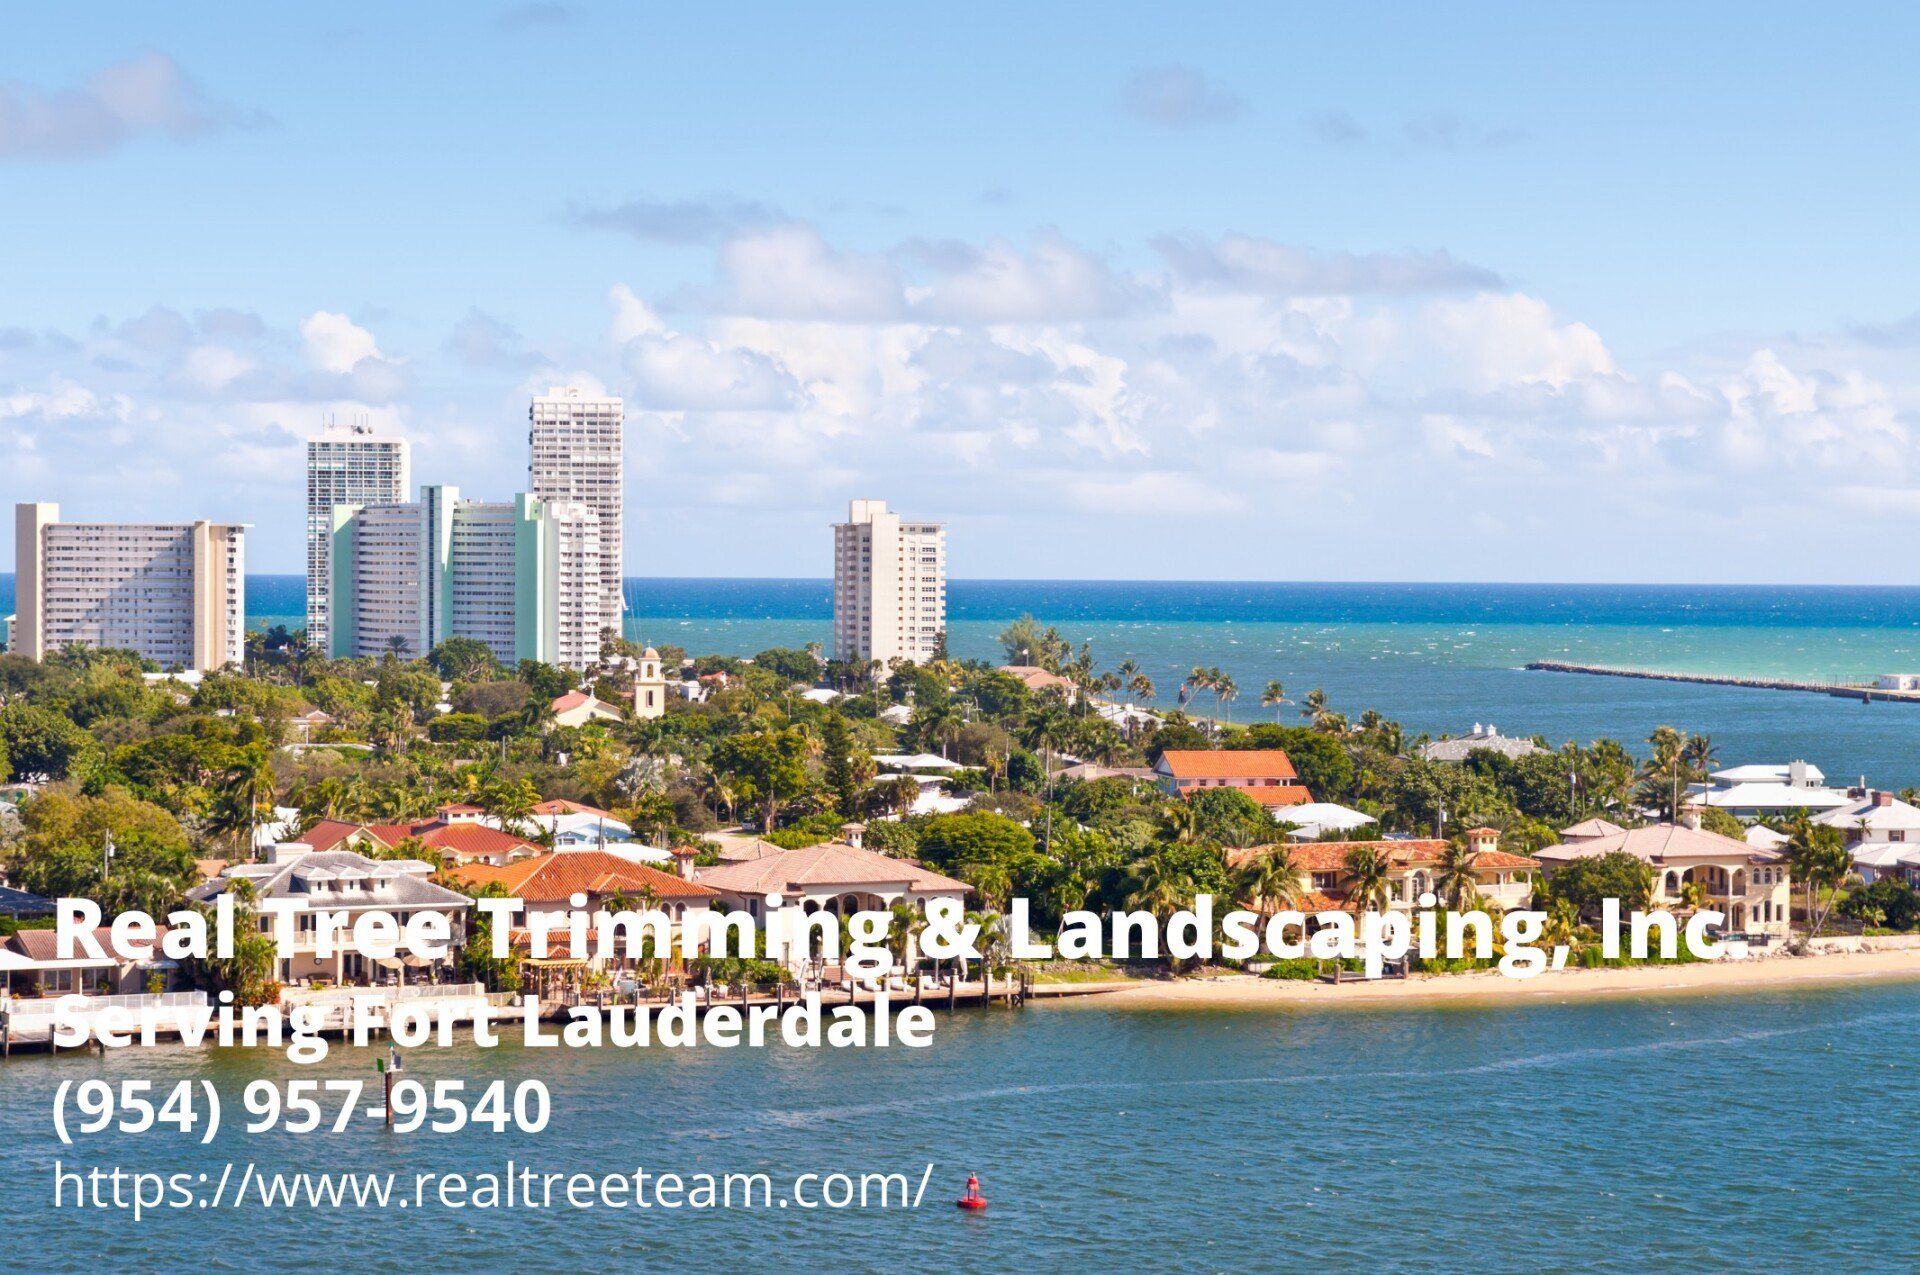 An aerial view of the Lauderdale Beach with the contact details of Real Tree Trimming & Landscaping, Inc.